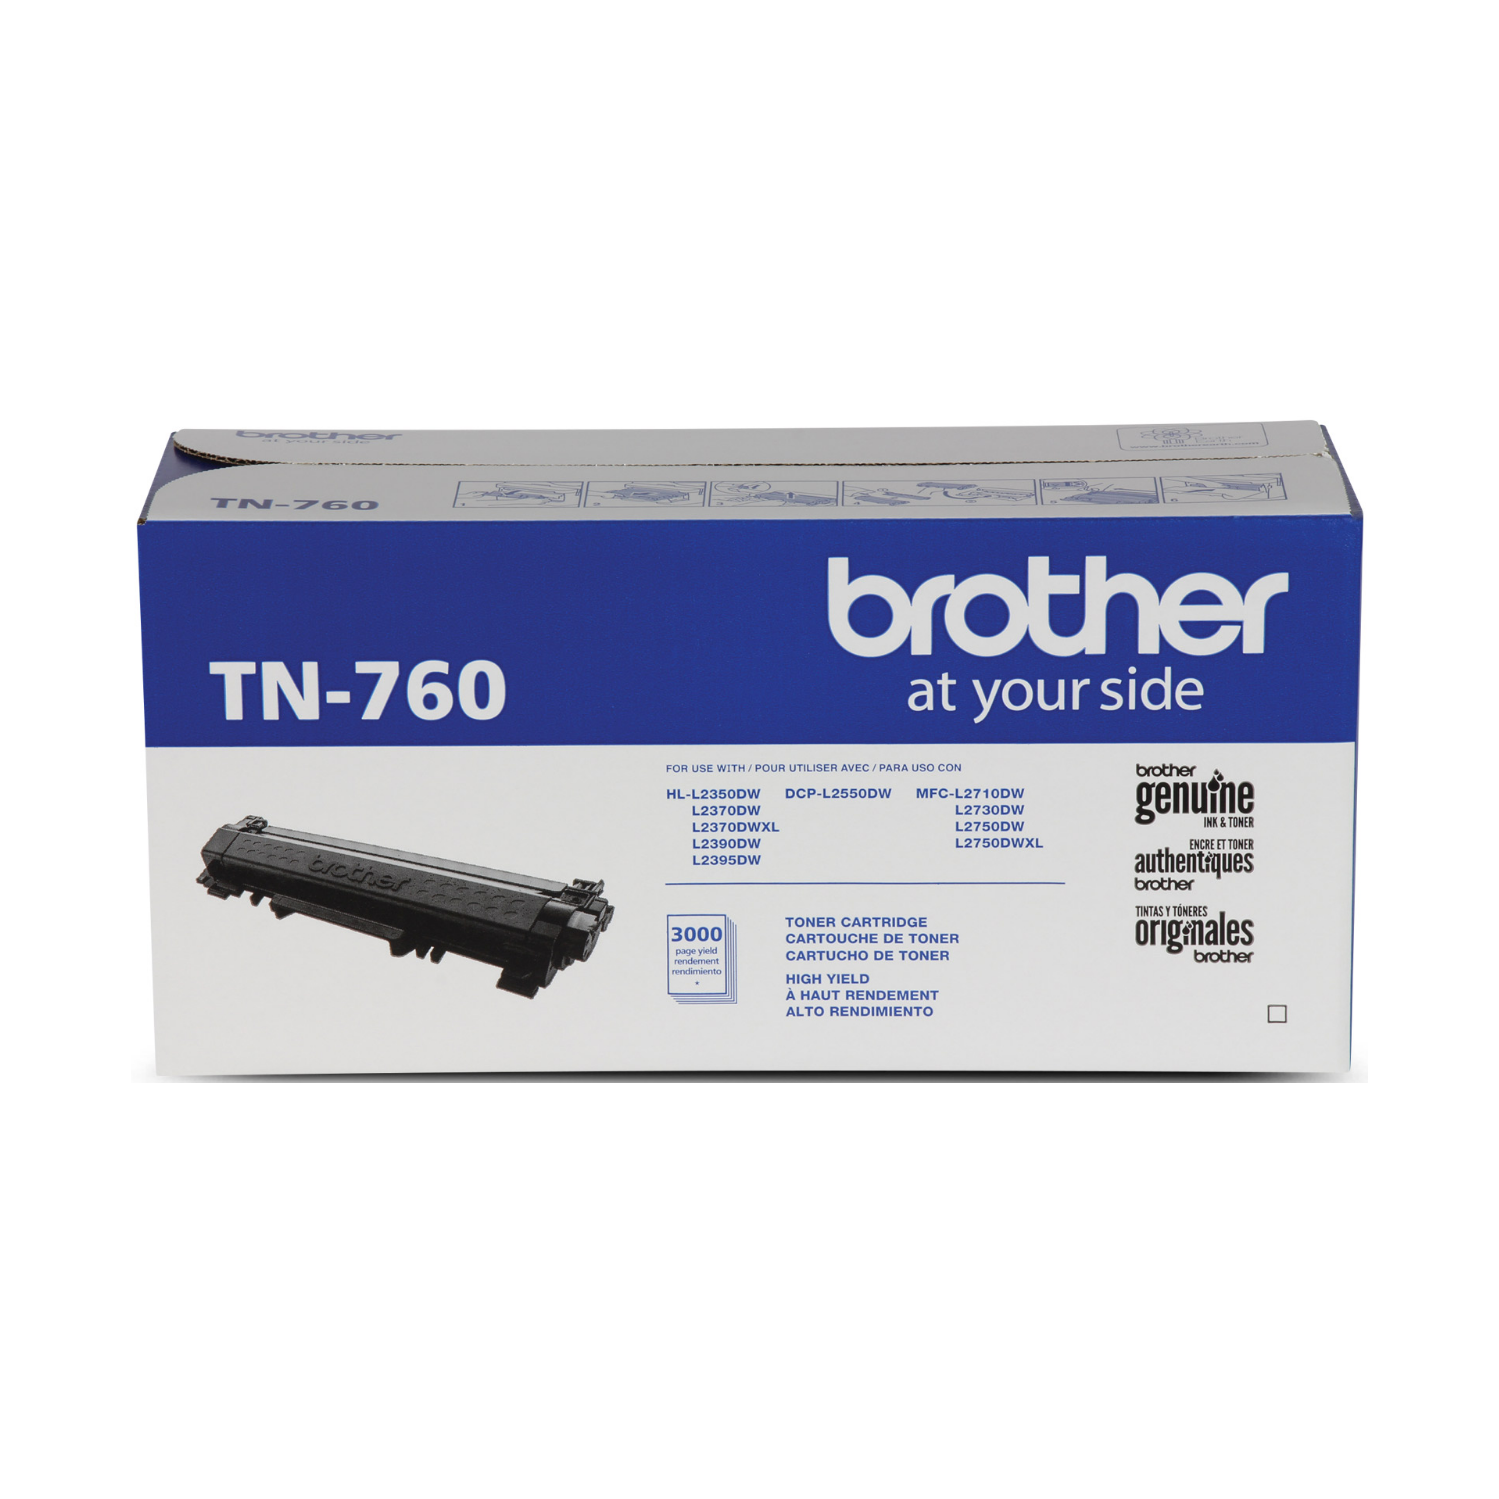 Brother TN760 (TN-760) Black High Yield Original Toner Cartridge, For Brother DCP-L2550, HL-L2350 to MFC-L2750